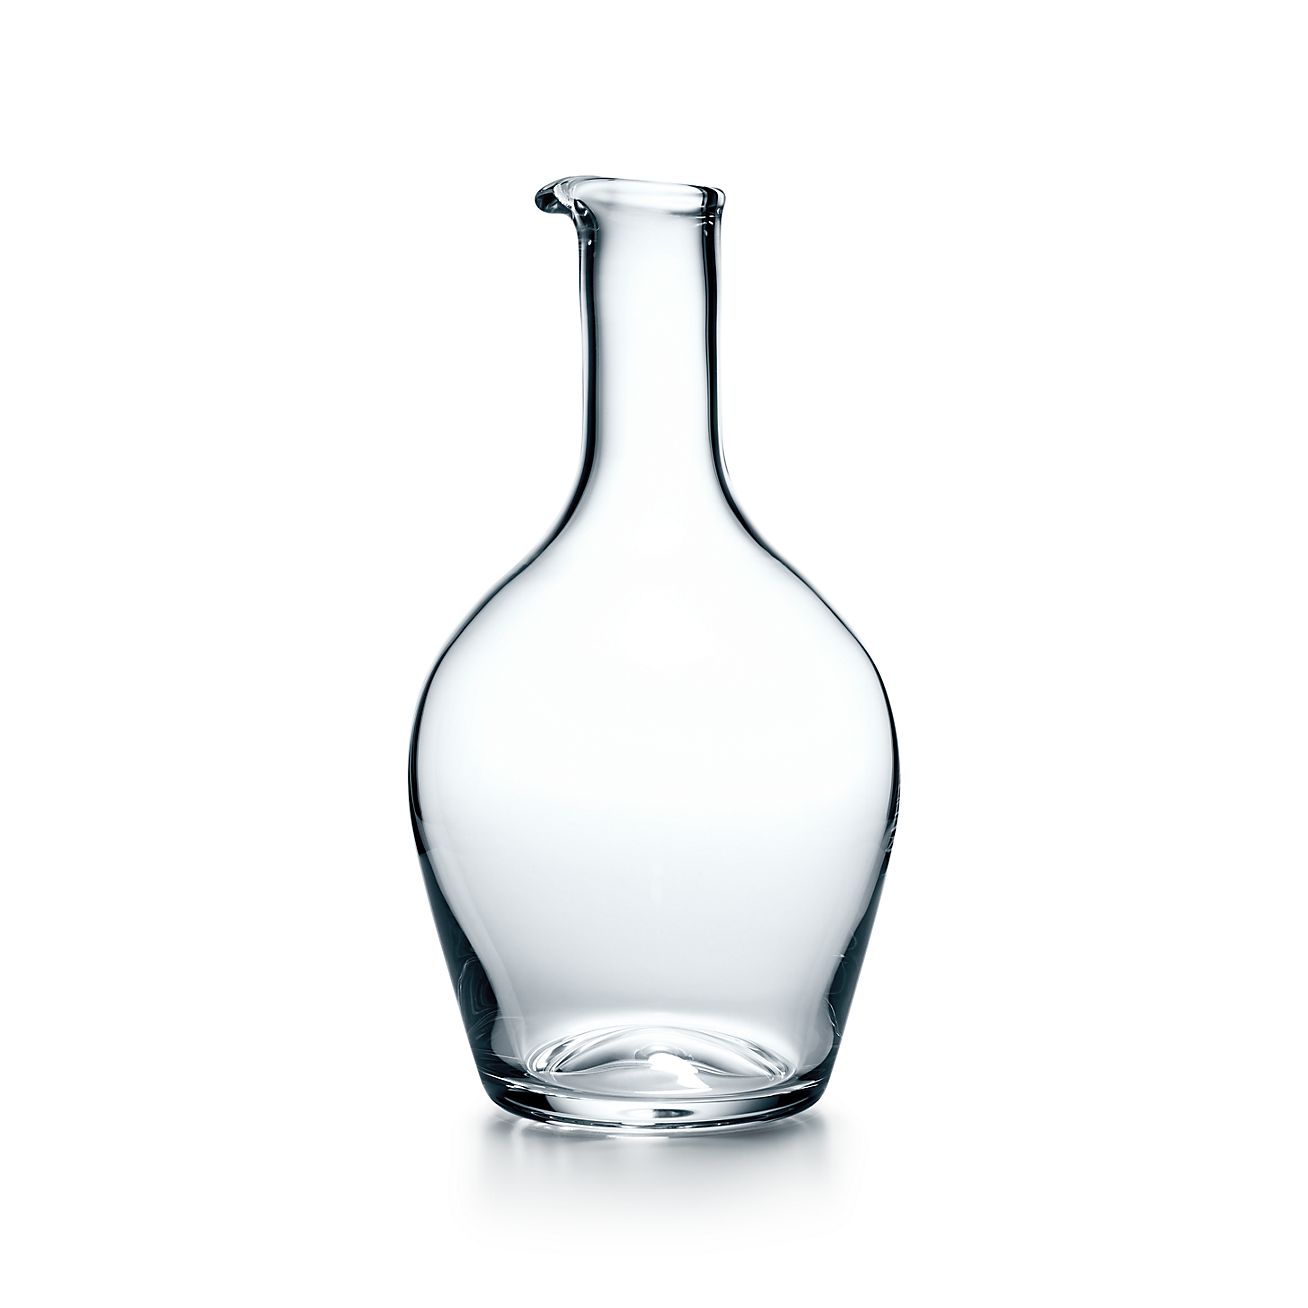 Round decanter in handmade, mouth-blown 